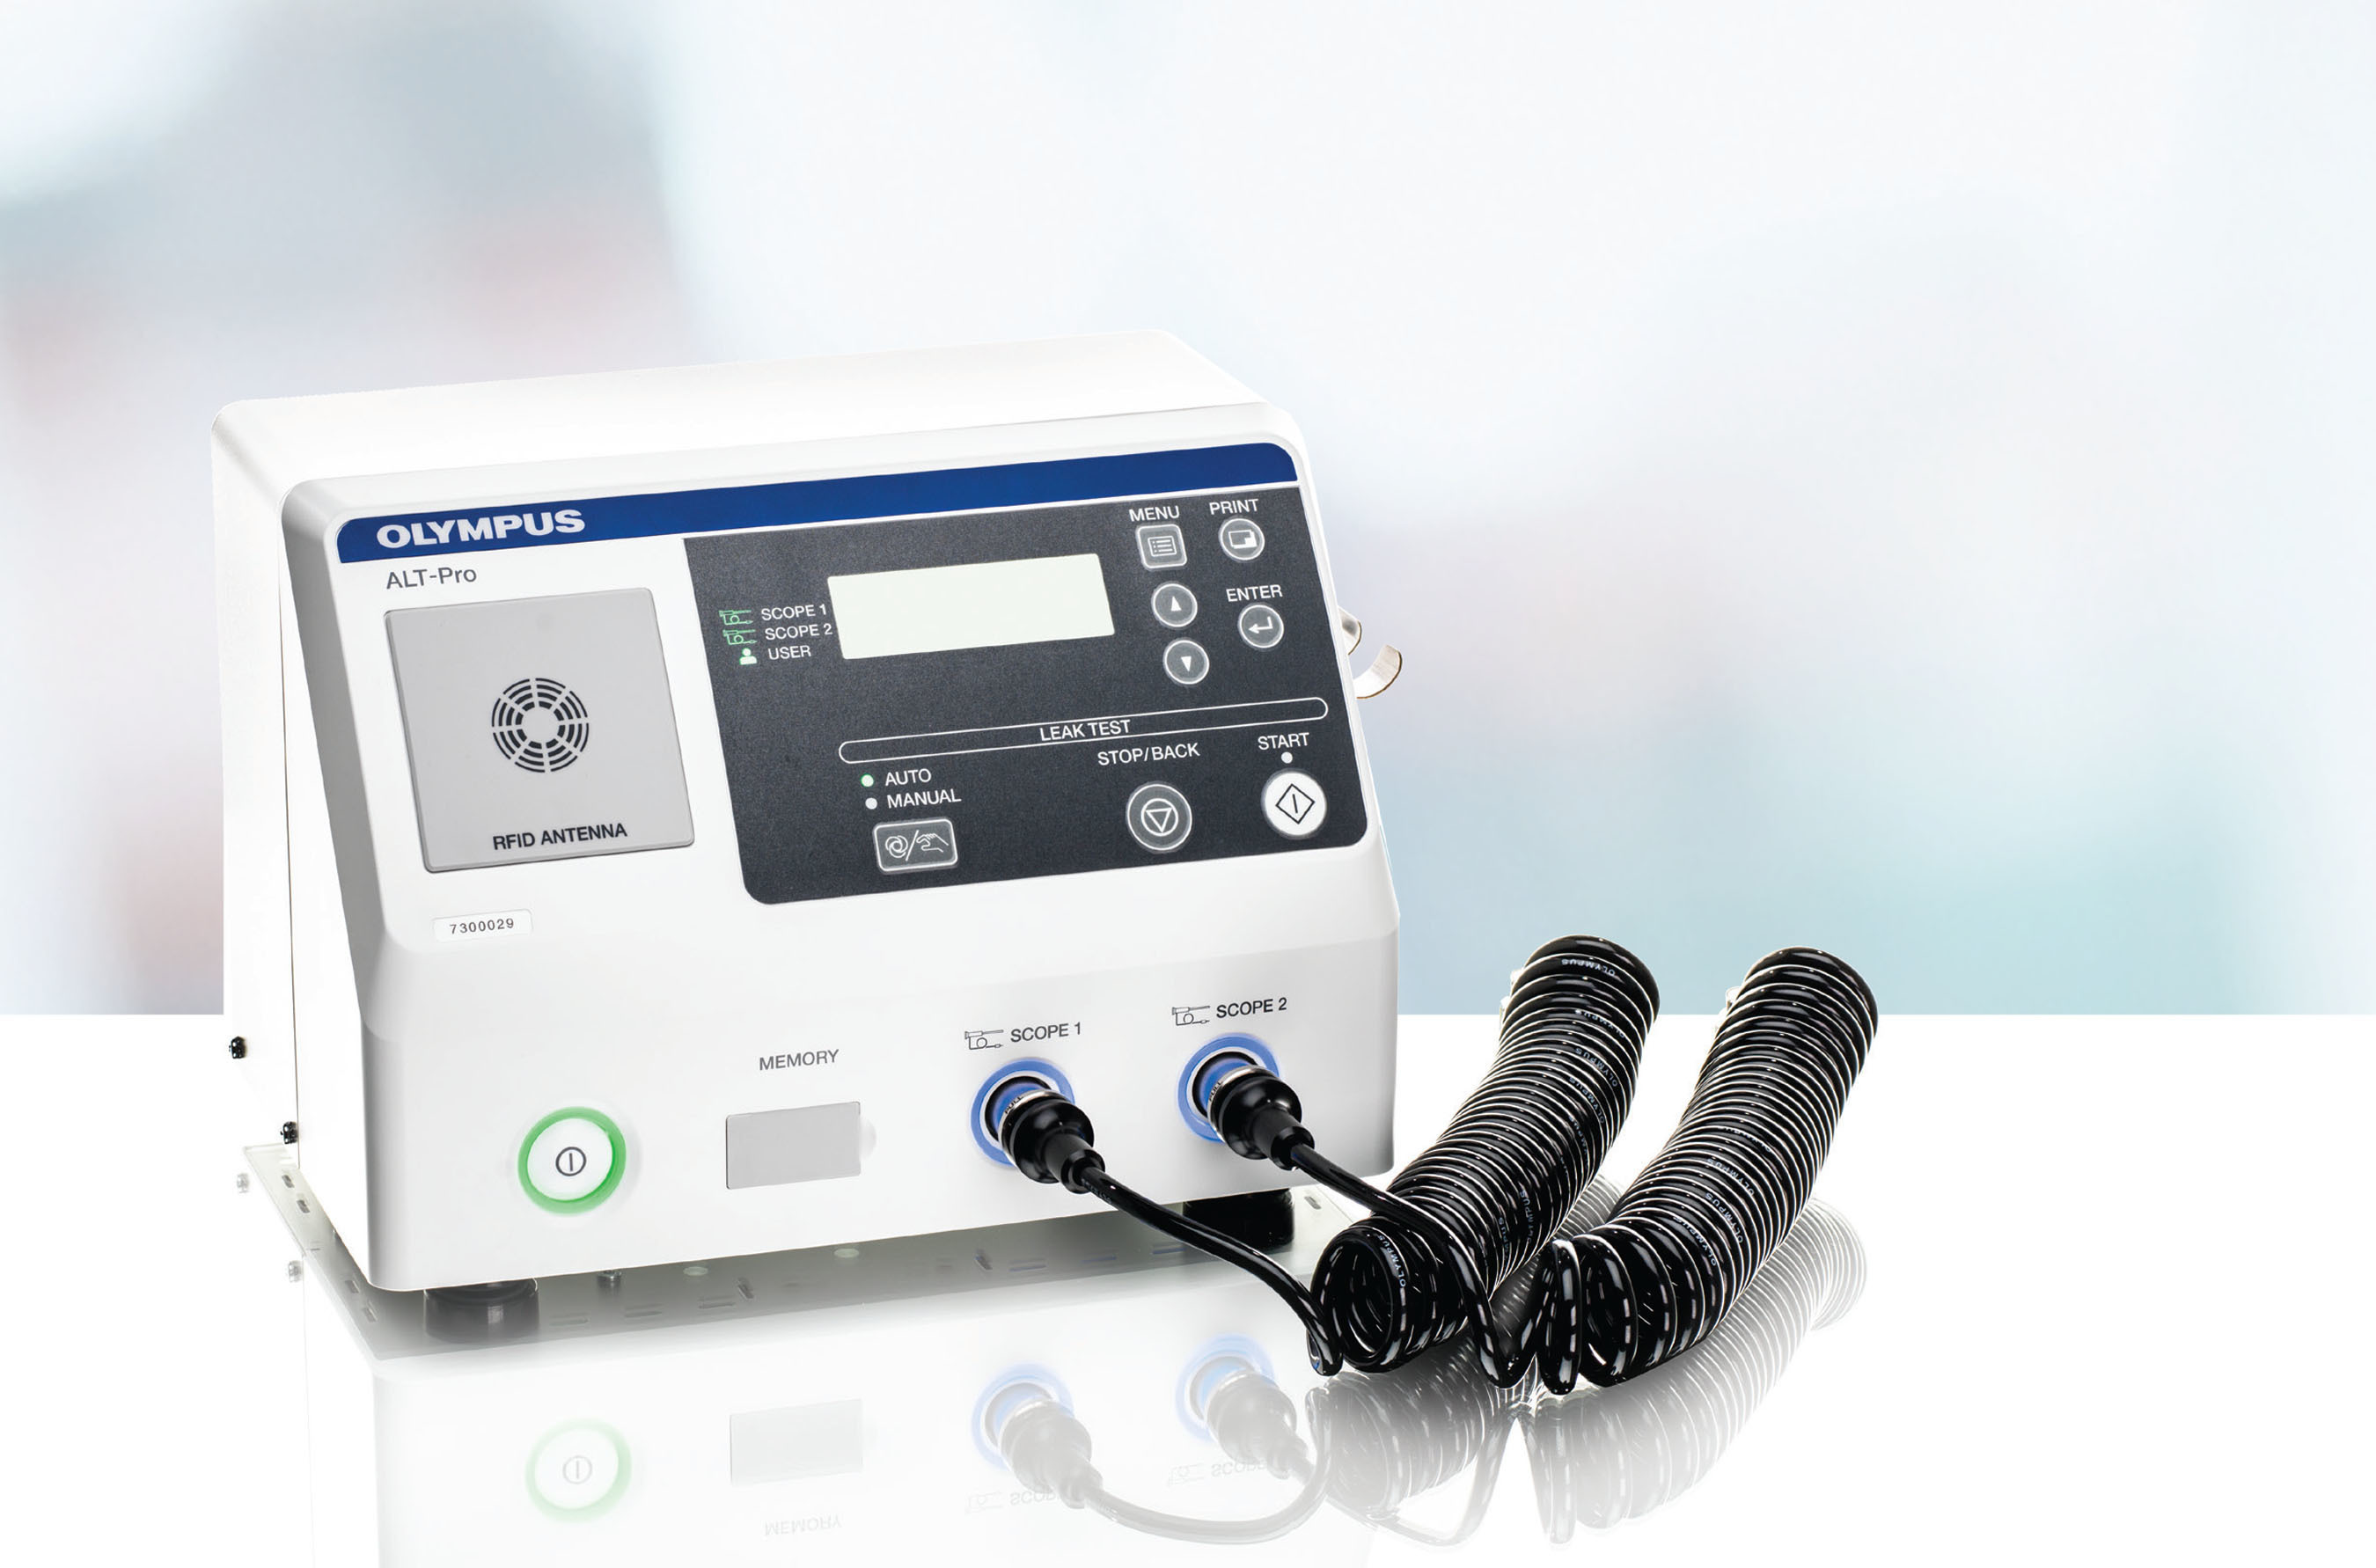 Olympus' ALT-Pro is the fastest, most compact automated leak tester used during endoscope reprocessing. (PRNewsFoto/Olympus)